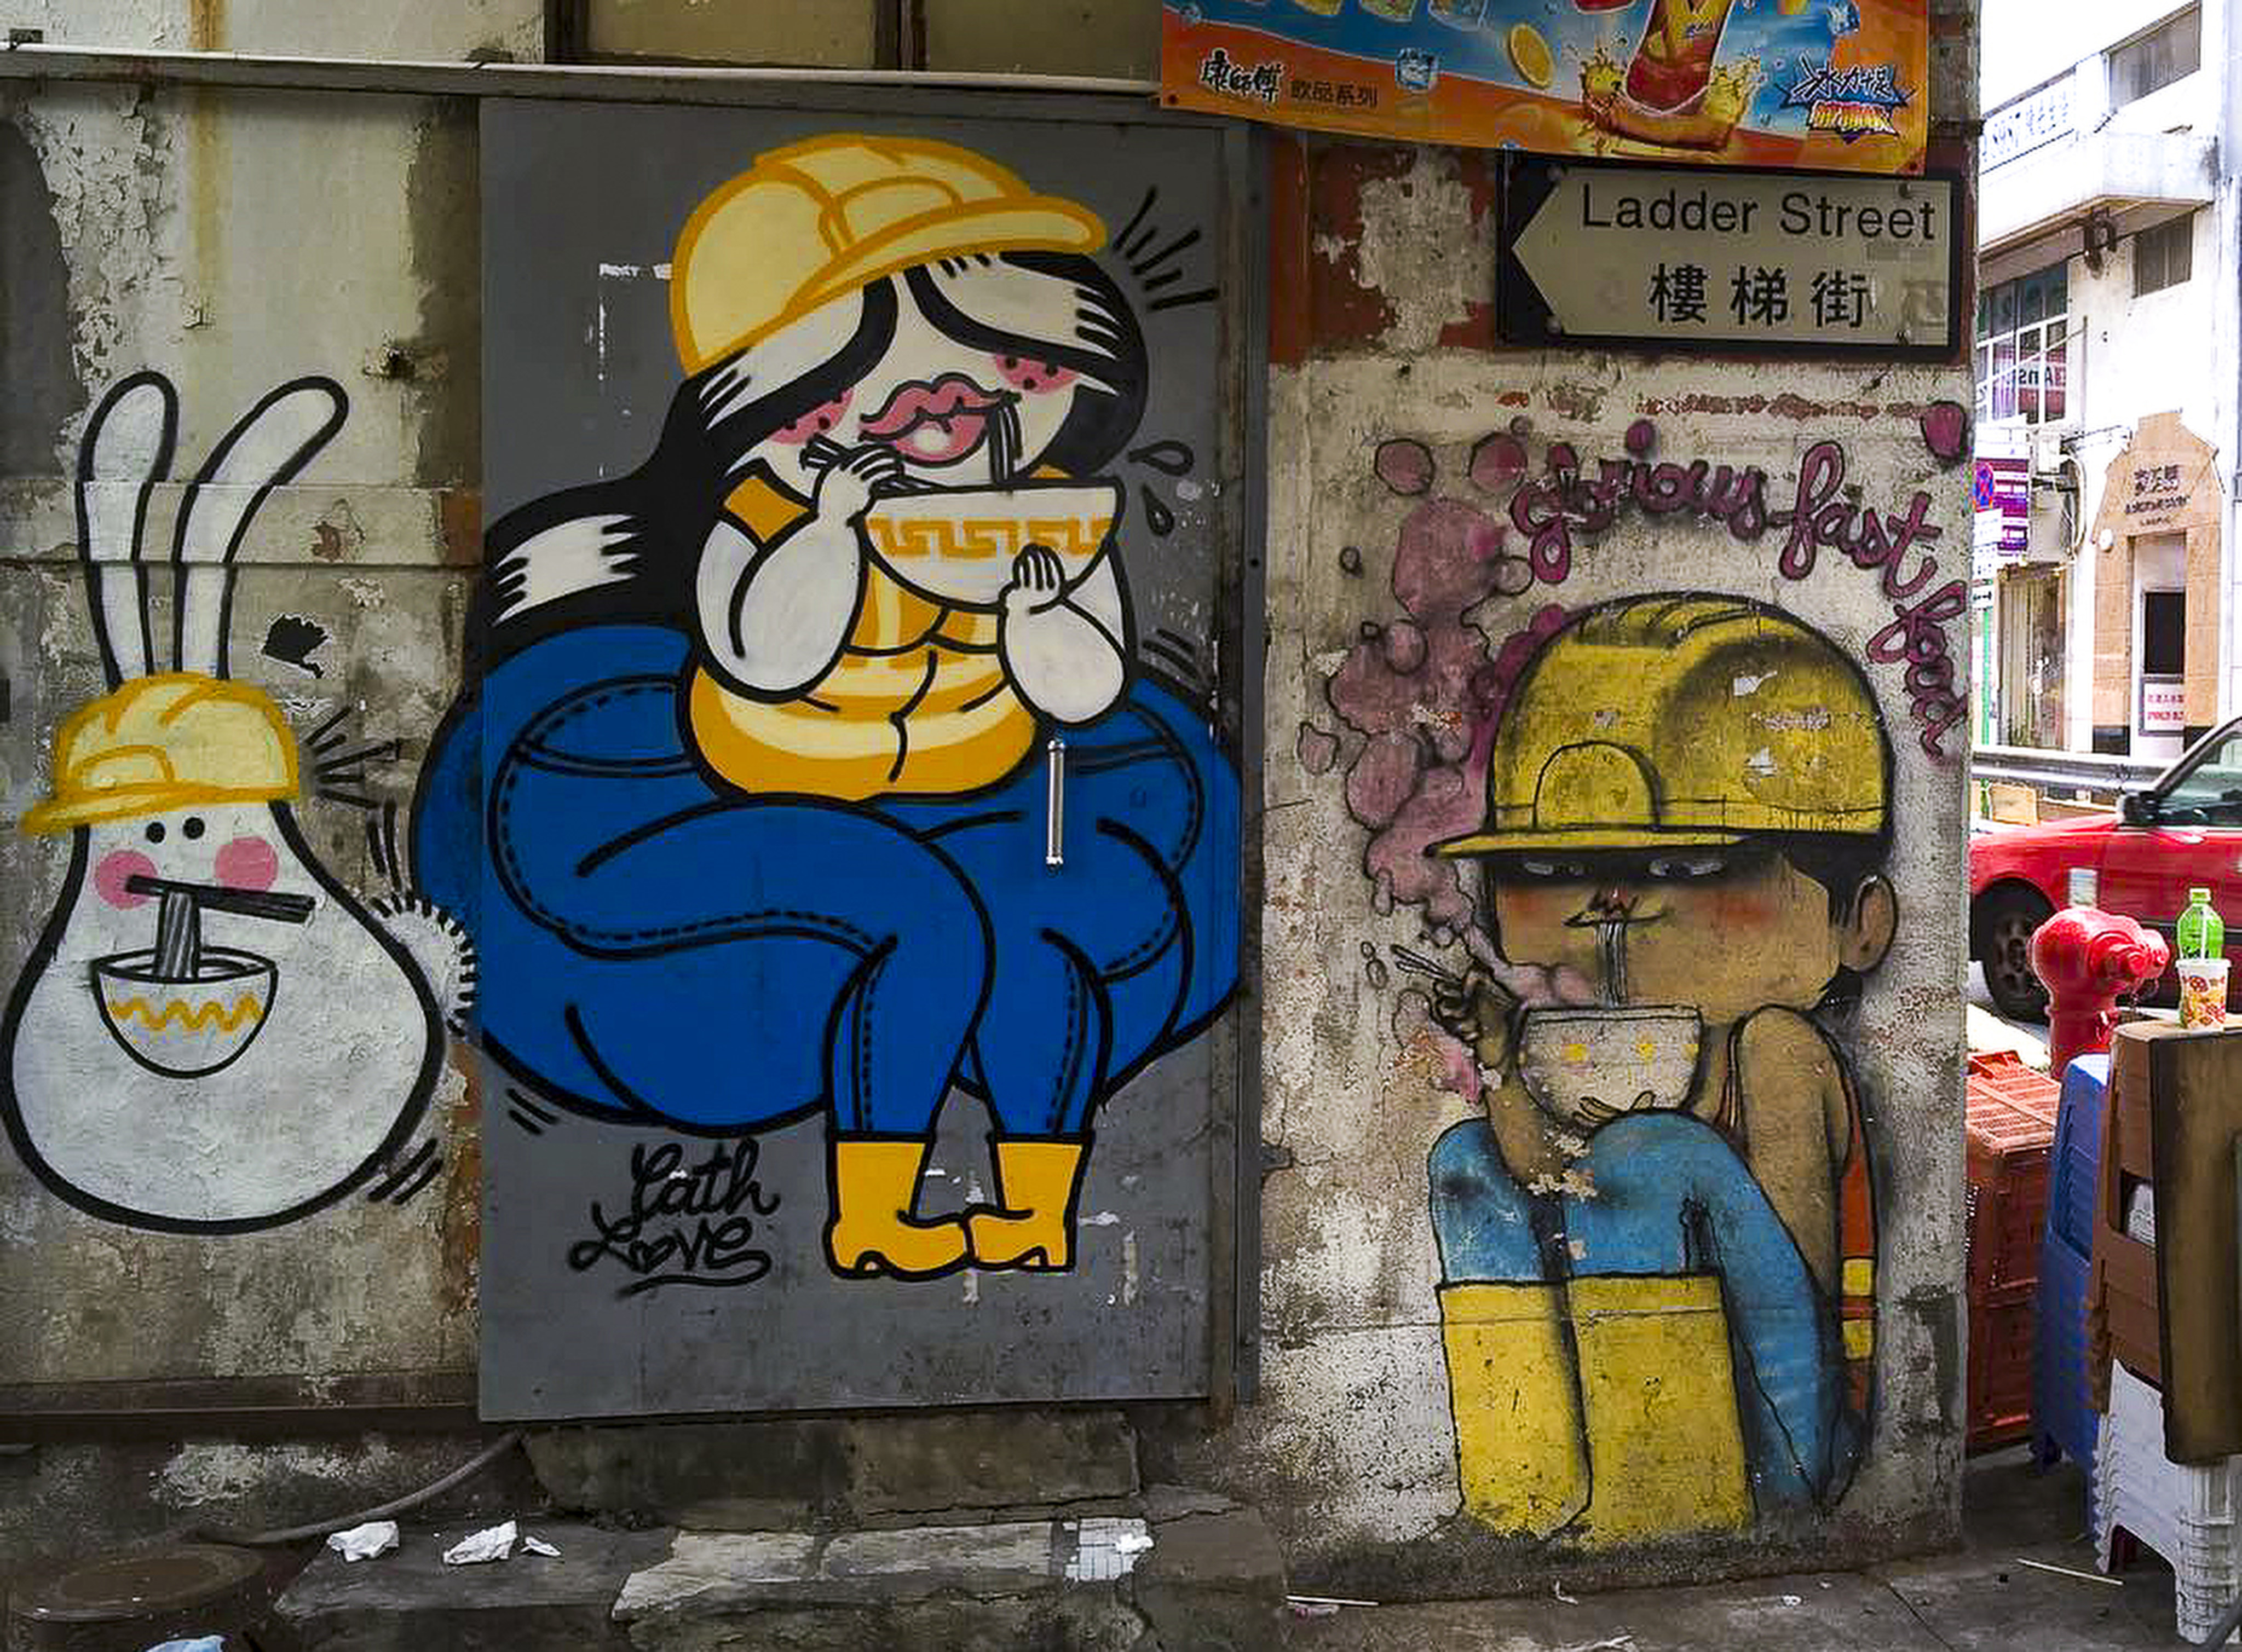 The artwork showing construction workers wearing yellow helmets was put up in 2011. Photo: Handout 